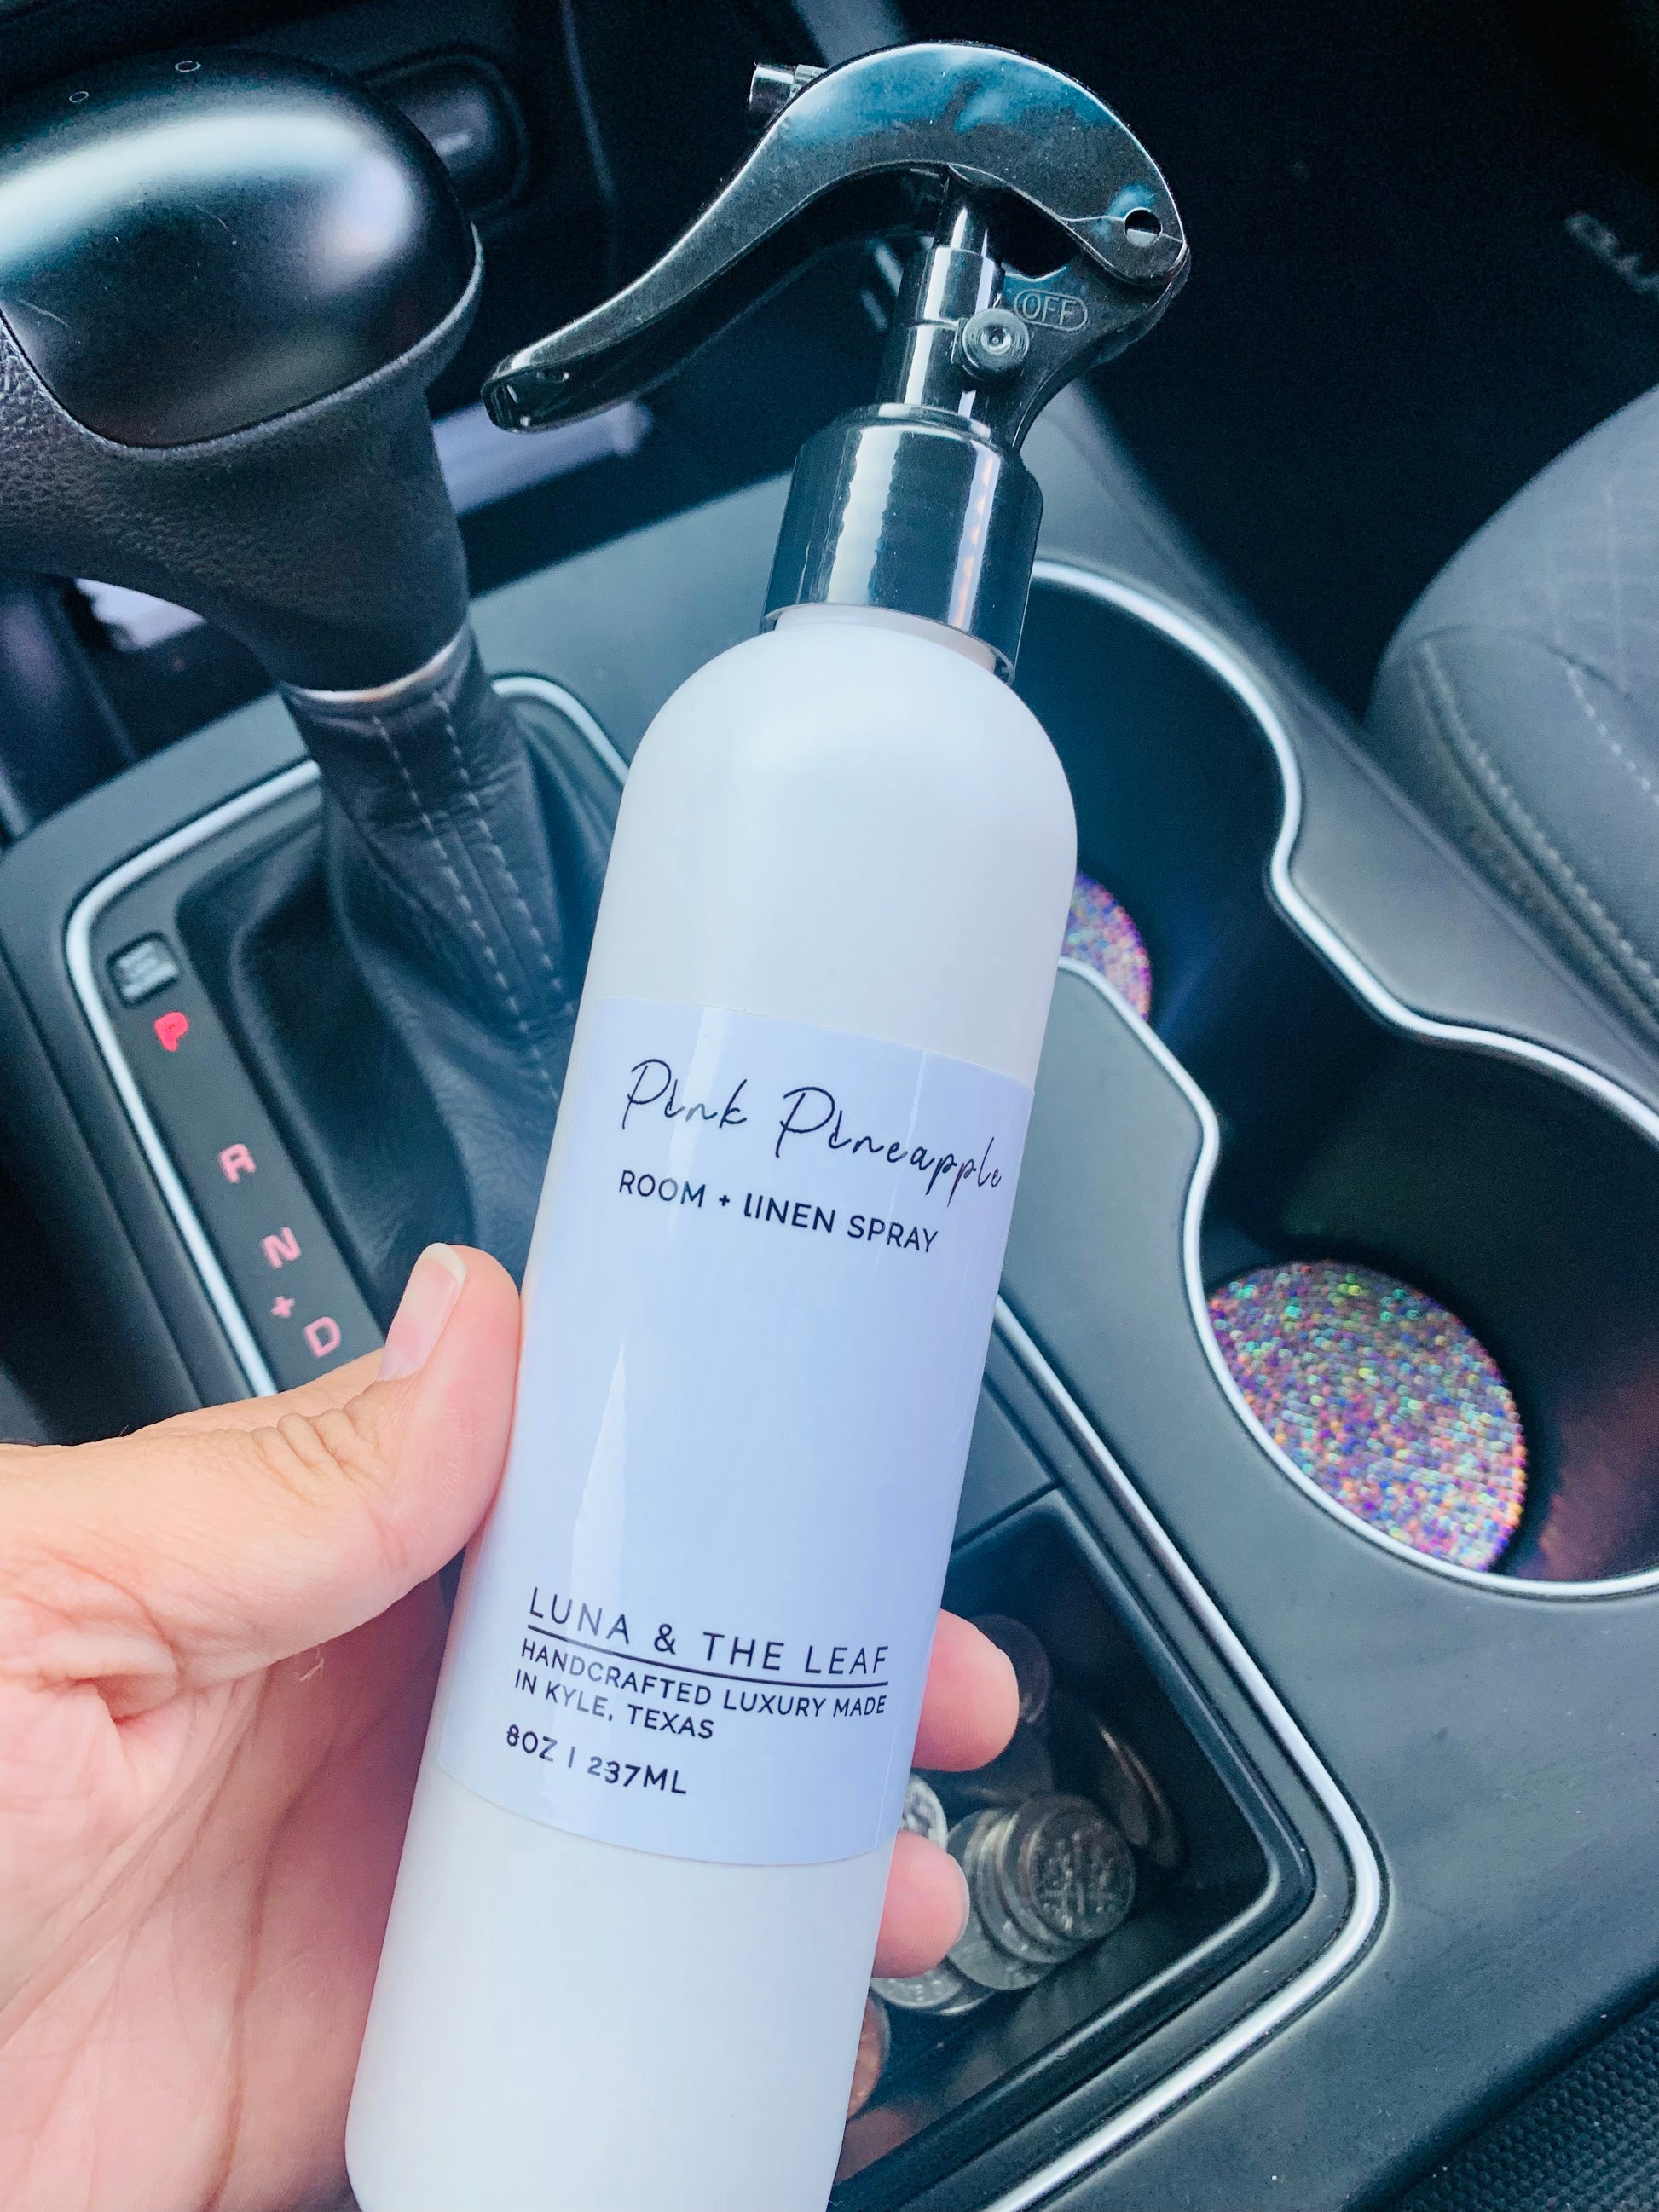 Hand holding a white bottle of Room Spray in the scent Pink Pineapple above the middle console in a car.